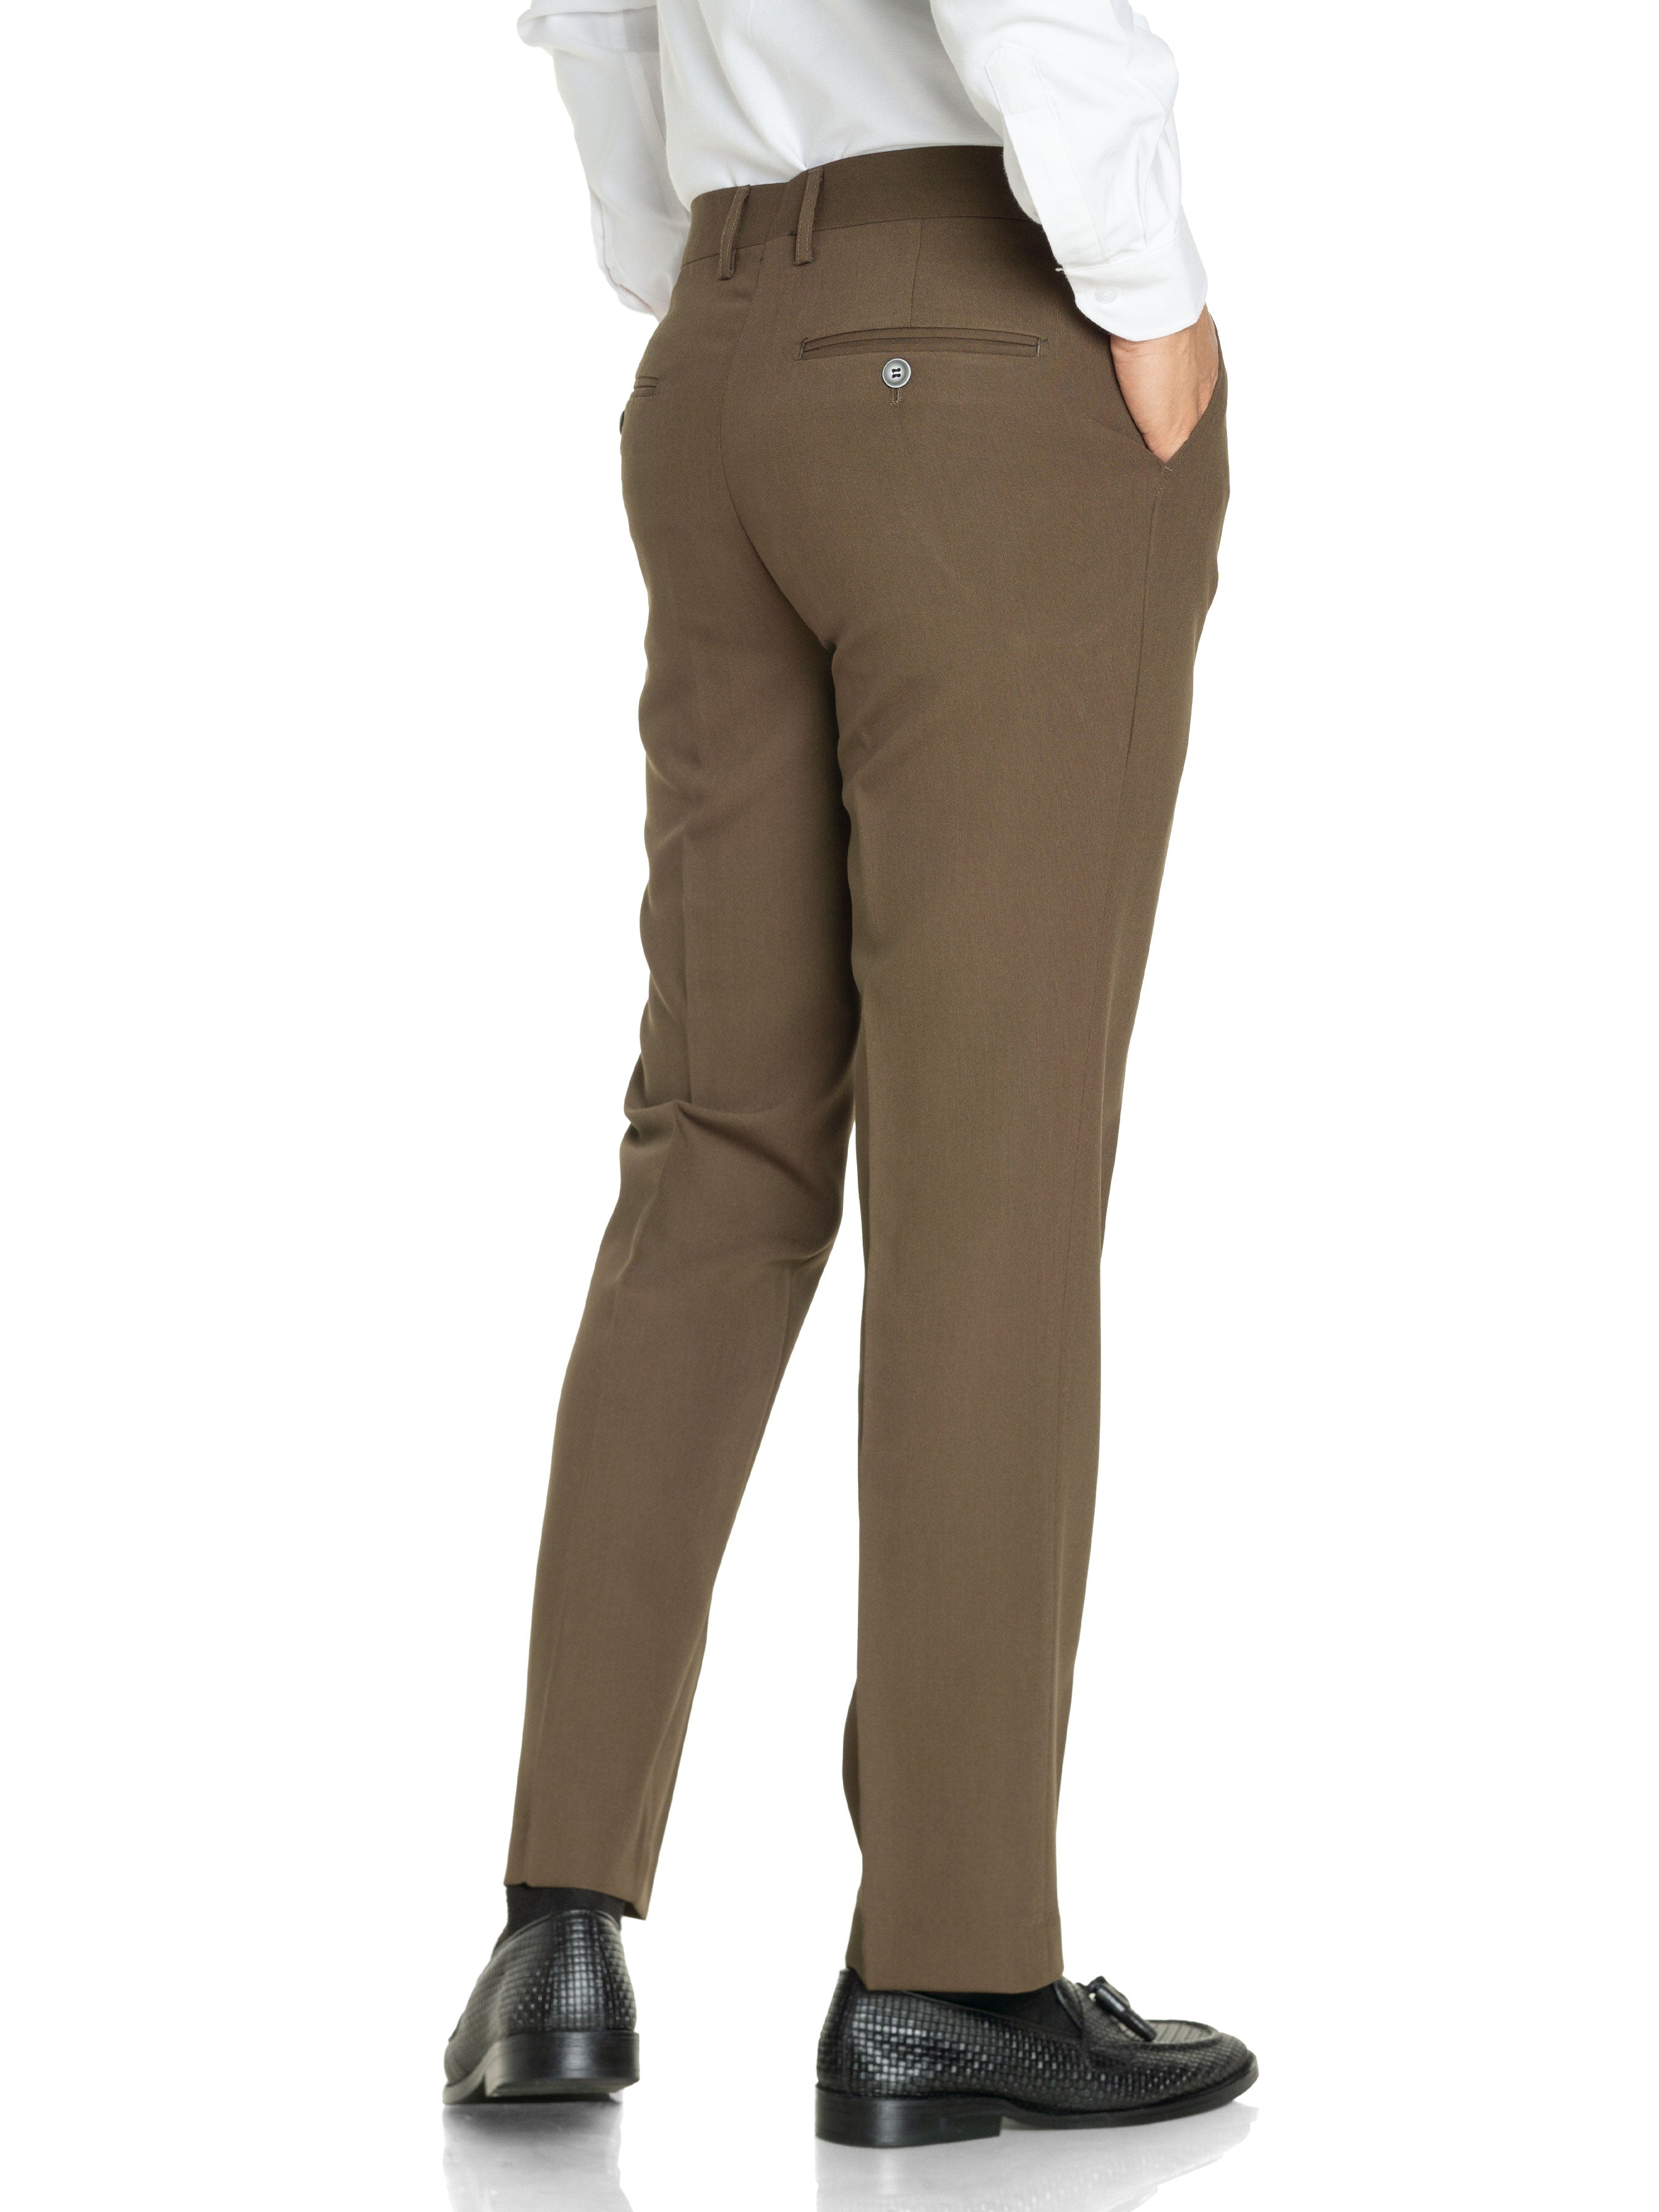 Trousers With Belt Loop - Coffee Plain (Stretchable) - Zeve Shoes